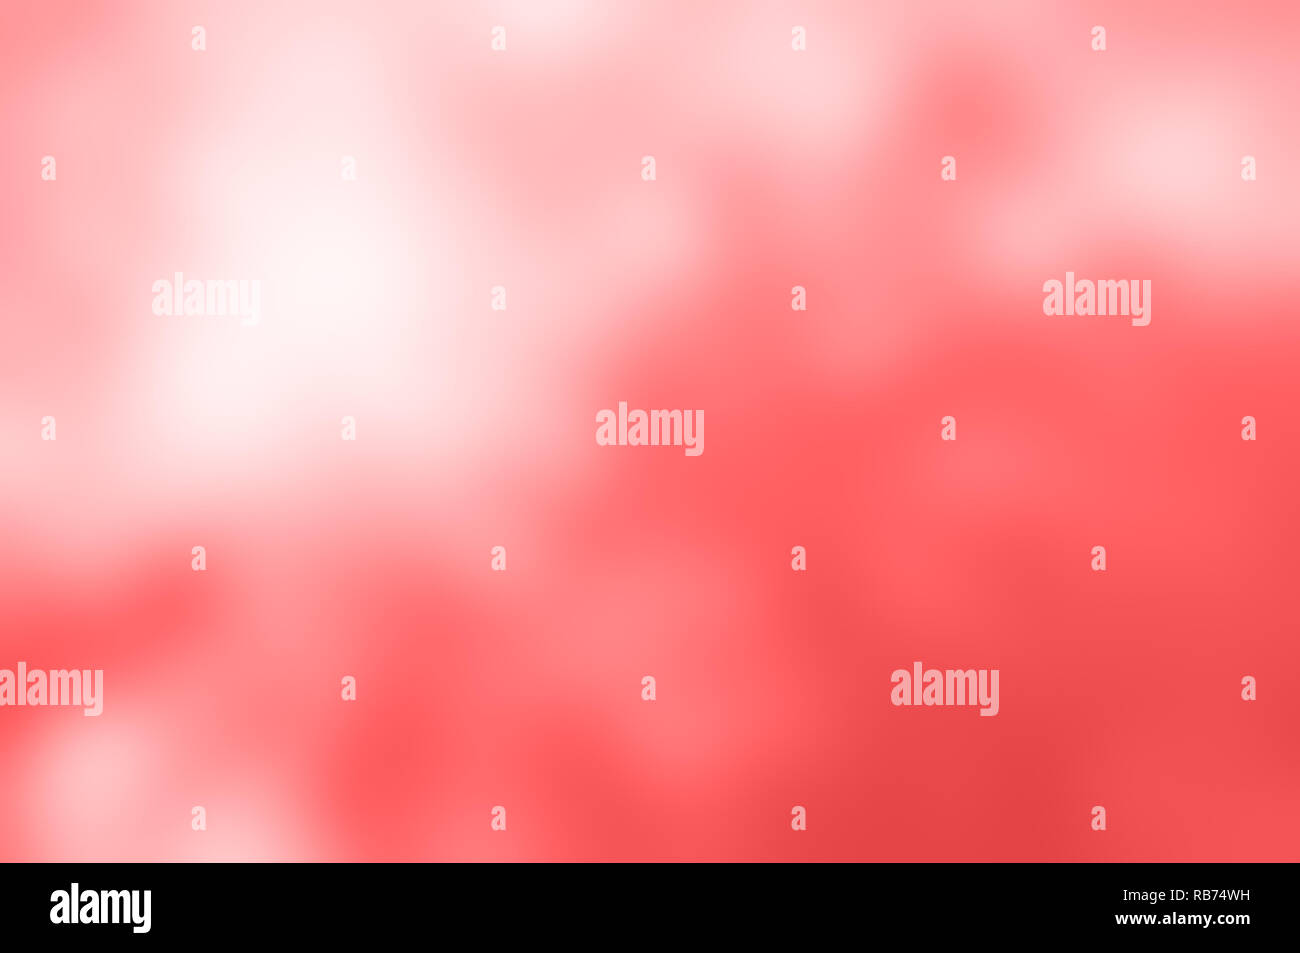 Soft background blur of coral pink, dappled with white light. Stock Photo